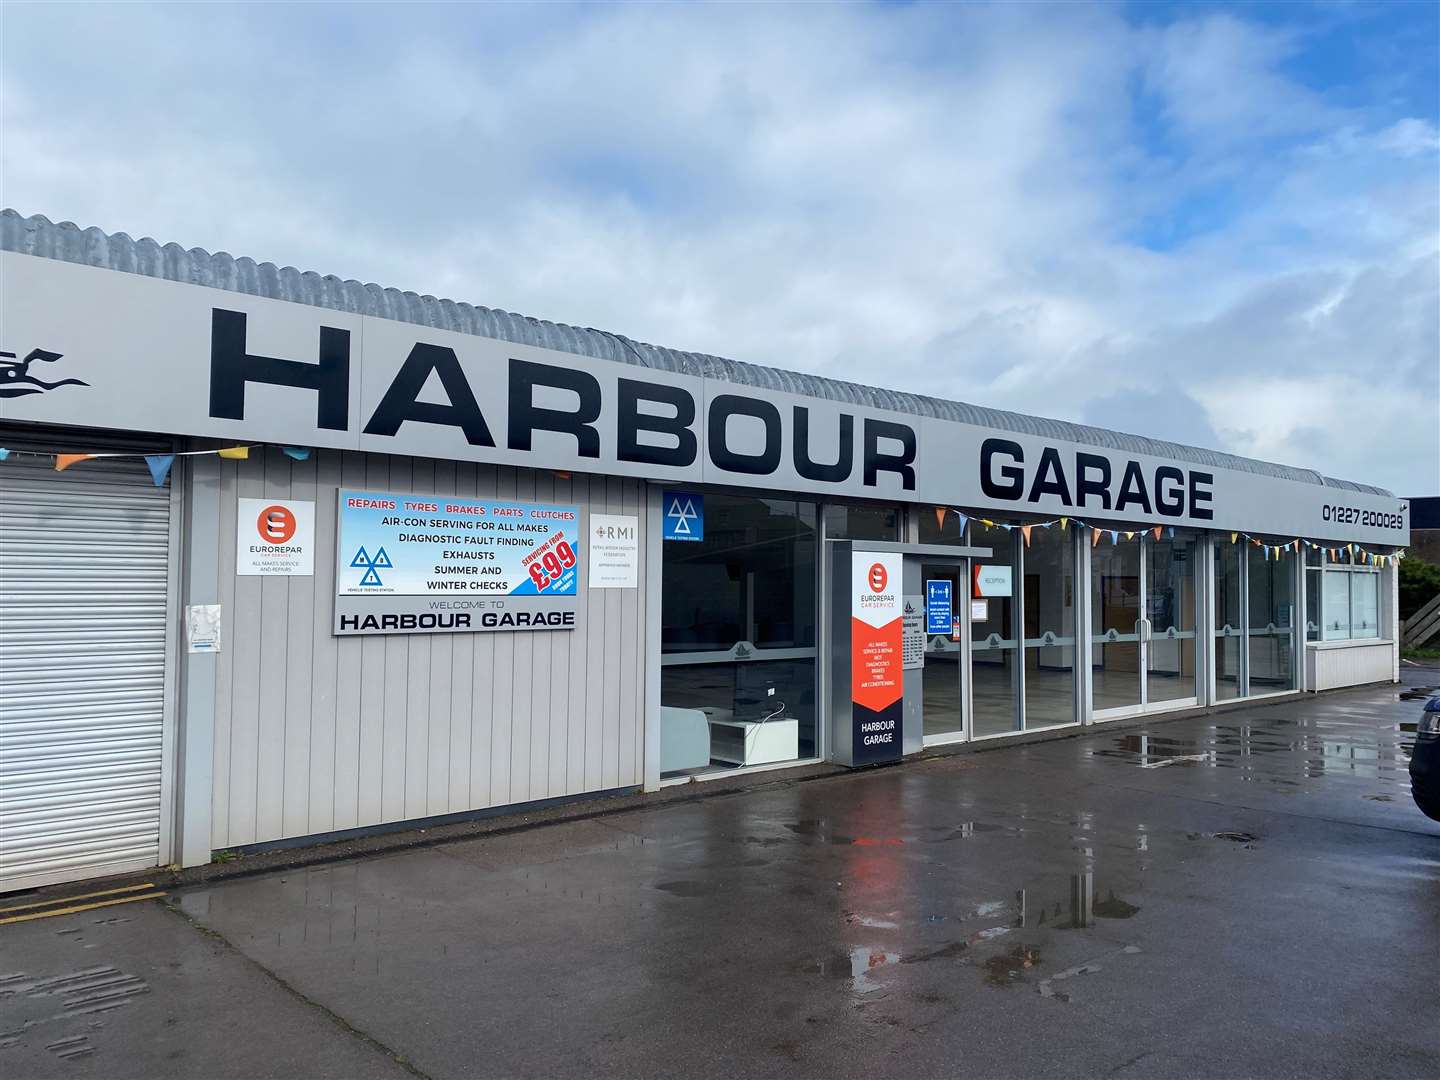 Harbour Garage in Whitstable closed last month